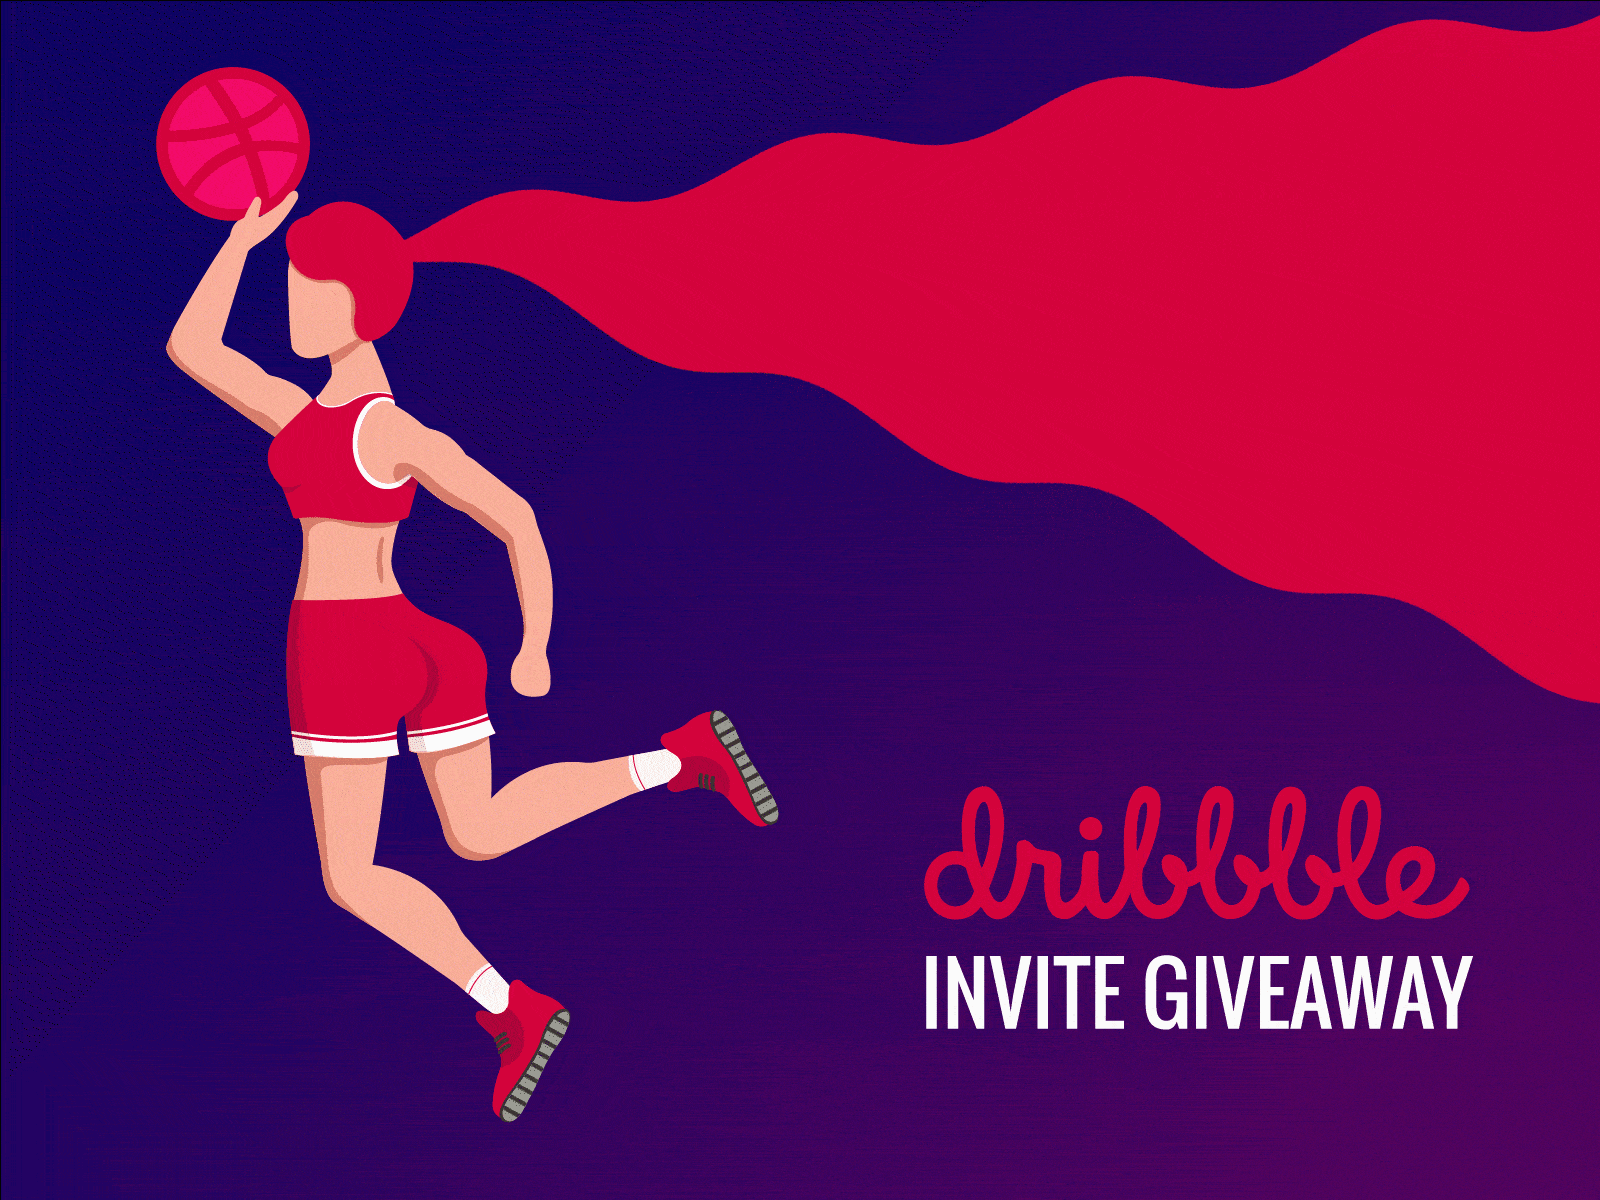 Dribbble invite giveaway 2d animated animation basketball basketball player dribbble invite fitness flat design gradient illustration invitation invite join dribbble join us sport sport illustration vector workout